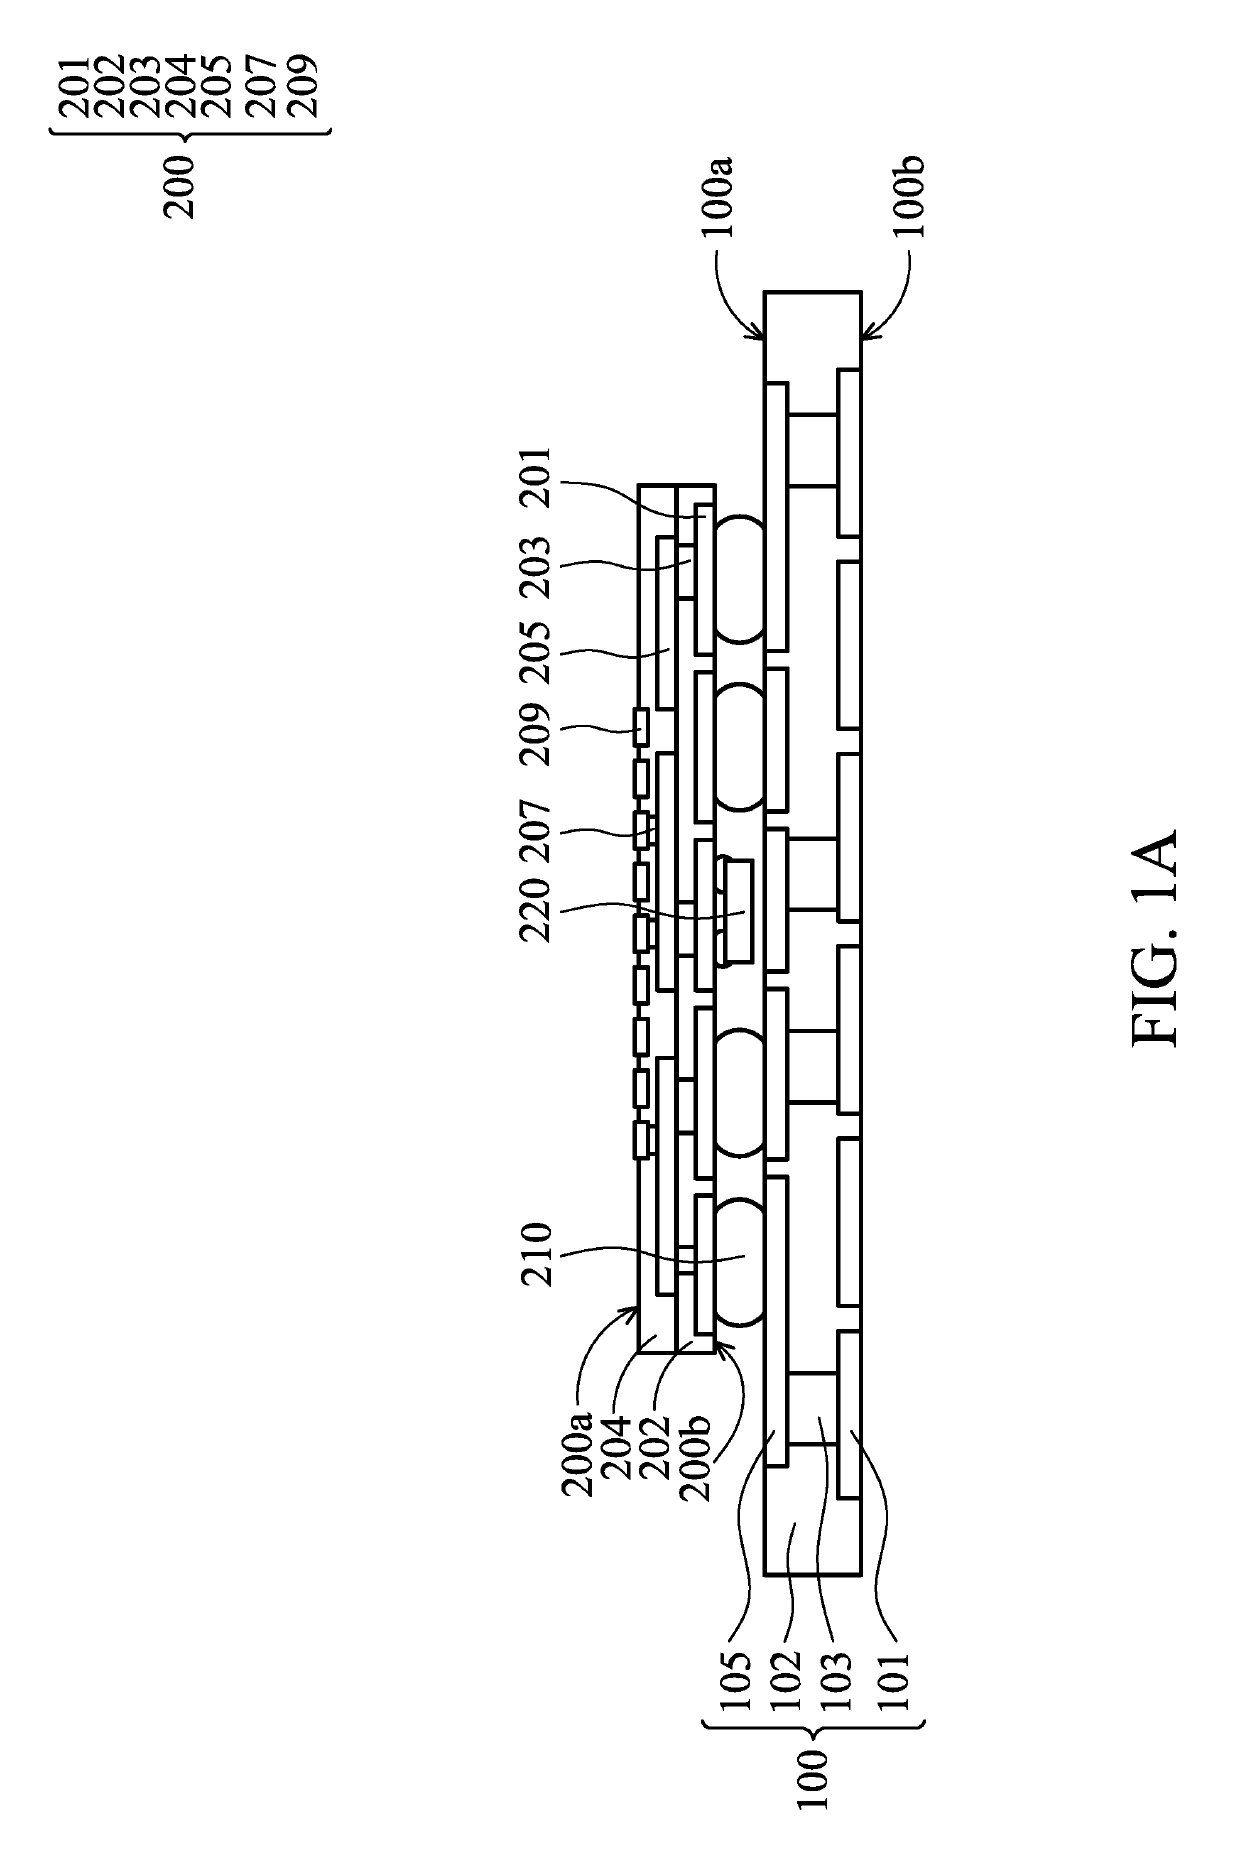 Fan-out package structure having stacked carrier substrates and method for forming the same